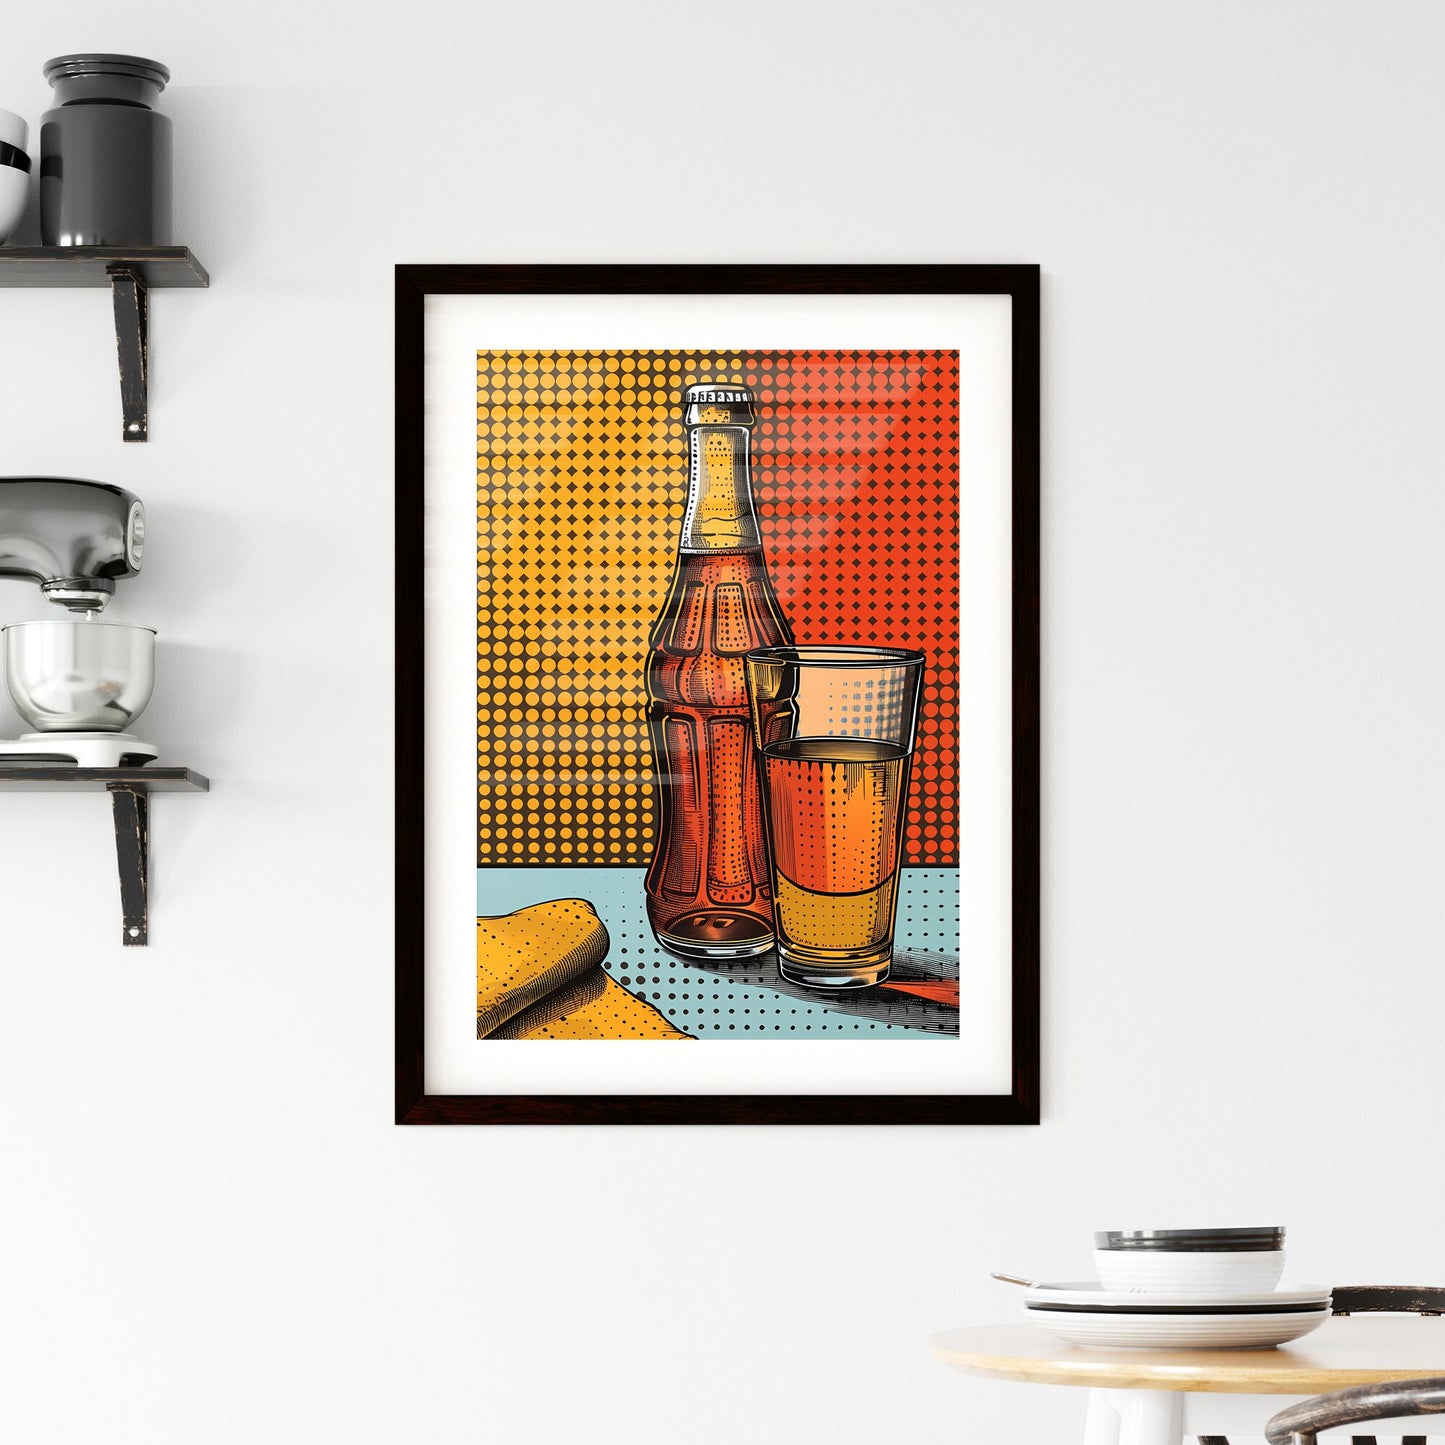 Pop Art Urban Lunch: Dynamic Comic Strip-Inspired Still Life with Vibrant Colors, Bold Lines, and Symbolism Default Title